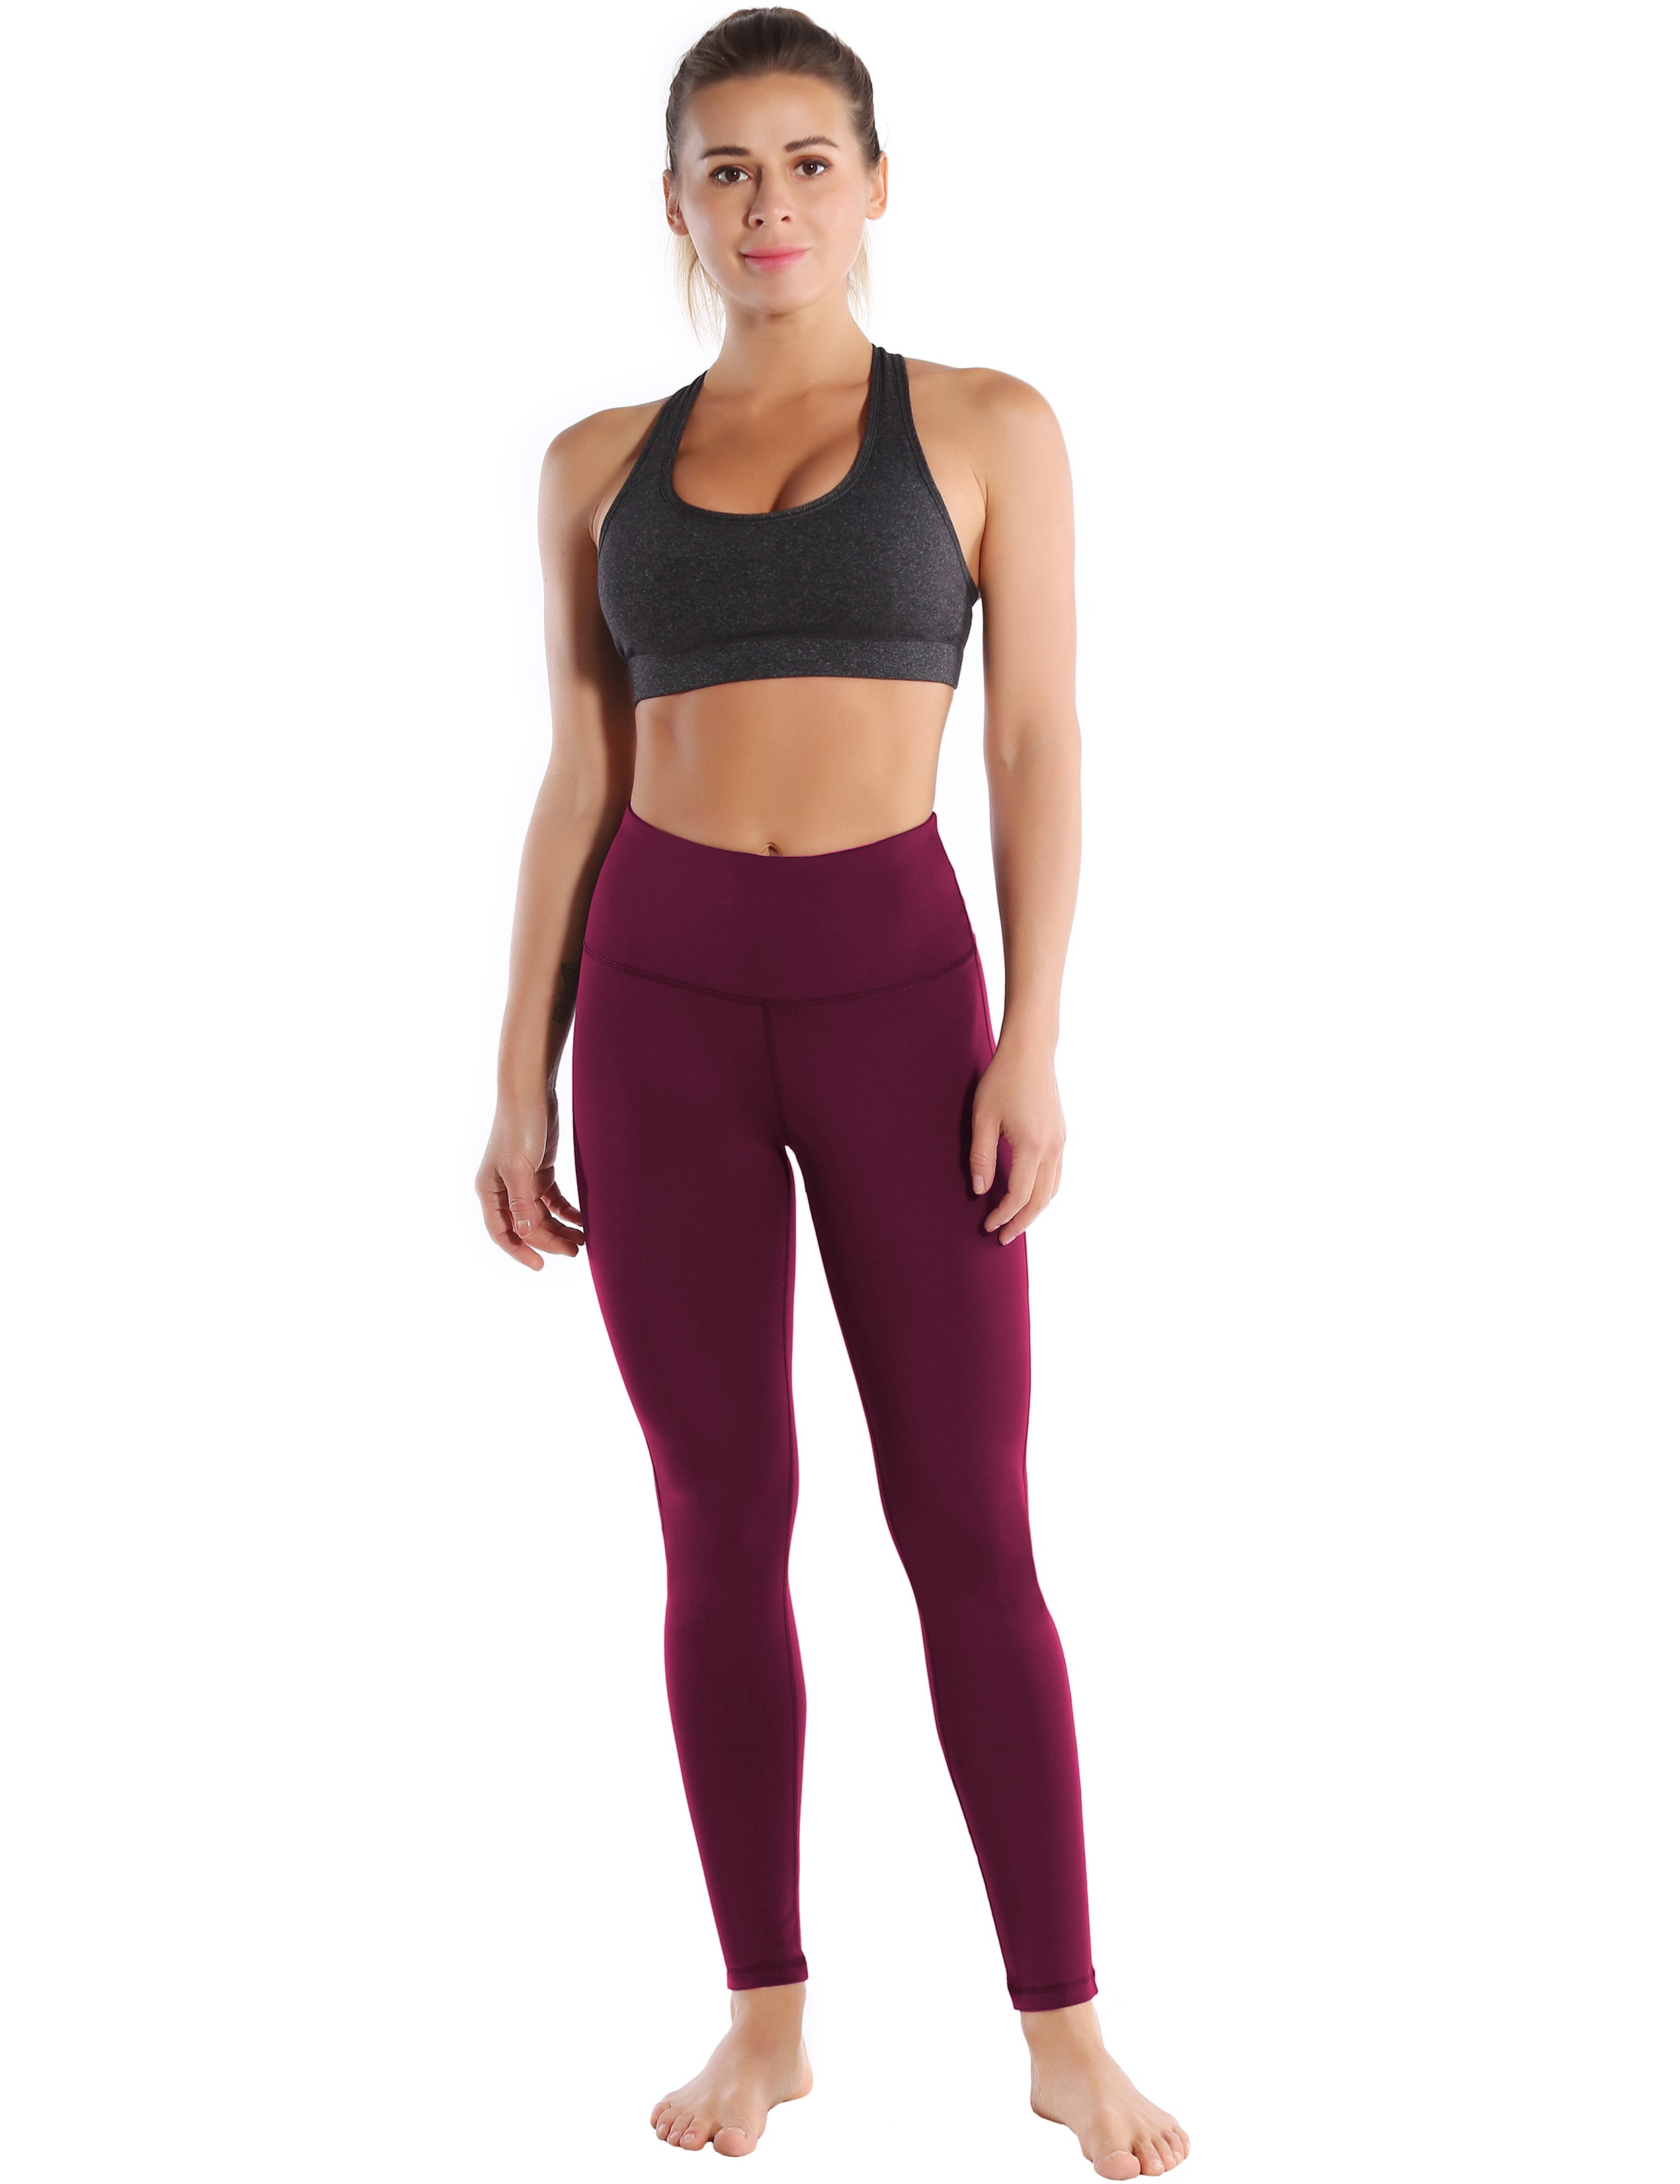 High Waist Side Line Biking Pants grapevine Side Line is Make Your Legs Look Longer and Thinner 75%Nylon/25%Spandex Fabric doesn't attract lint easily 4-way stretch No see-through Moisture-wicking Tummy control Inner pocket Two lengths